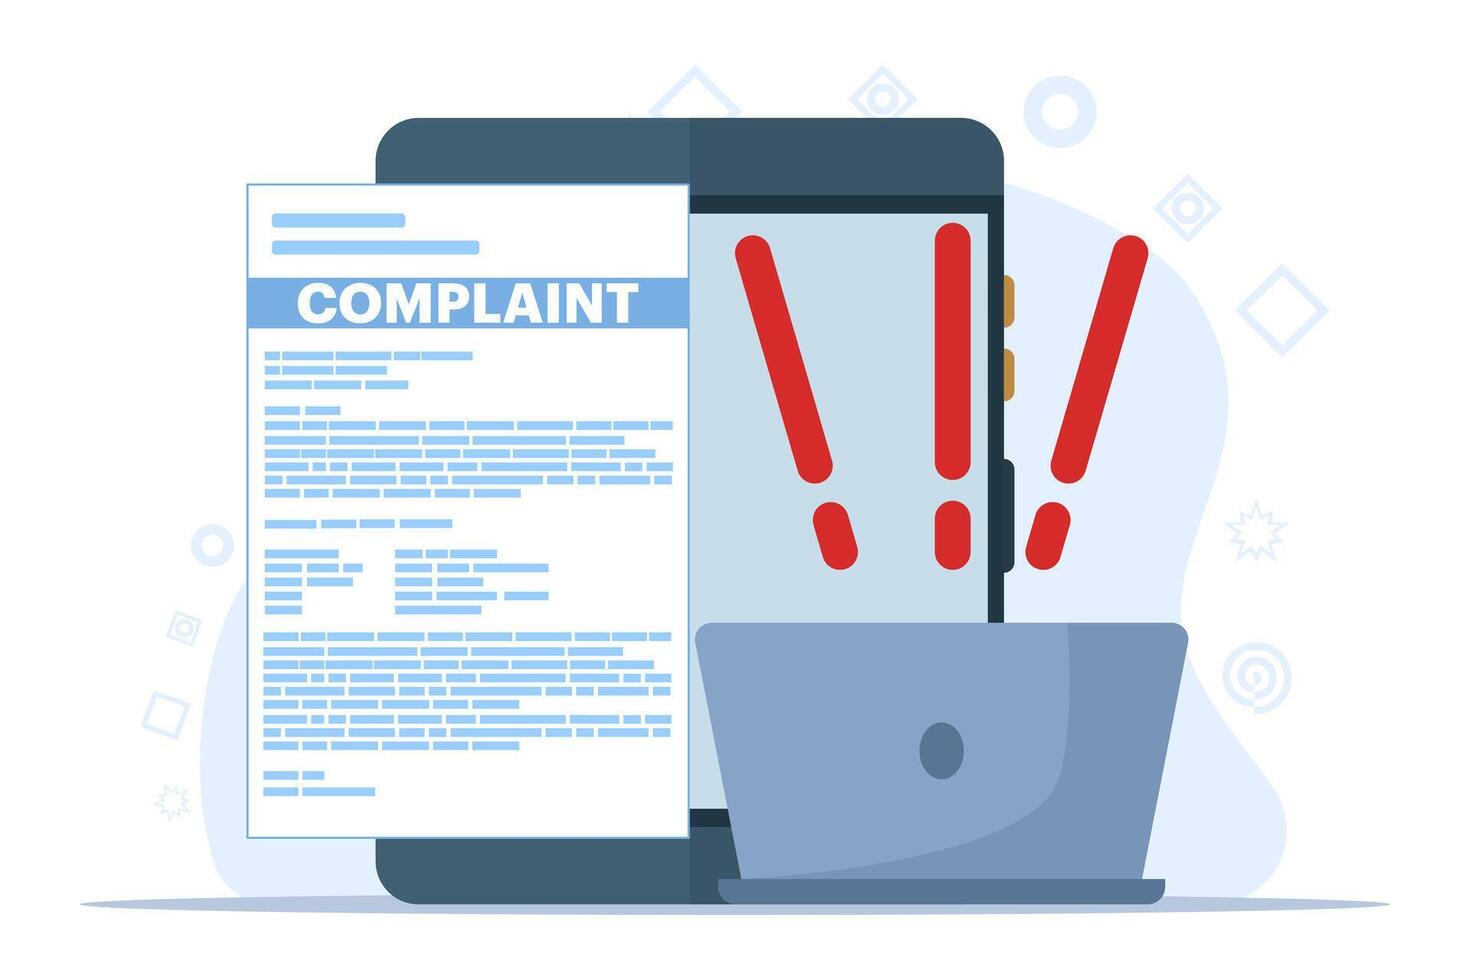 concept of online complaint, Claim petition, Dislike, Bad user experience, Bad review, Negative feedback, Action to resolve the problem. Flat illustration vector template.